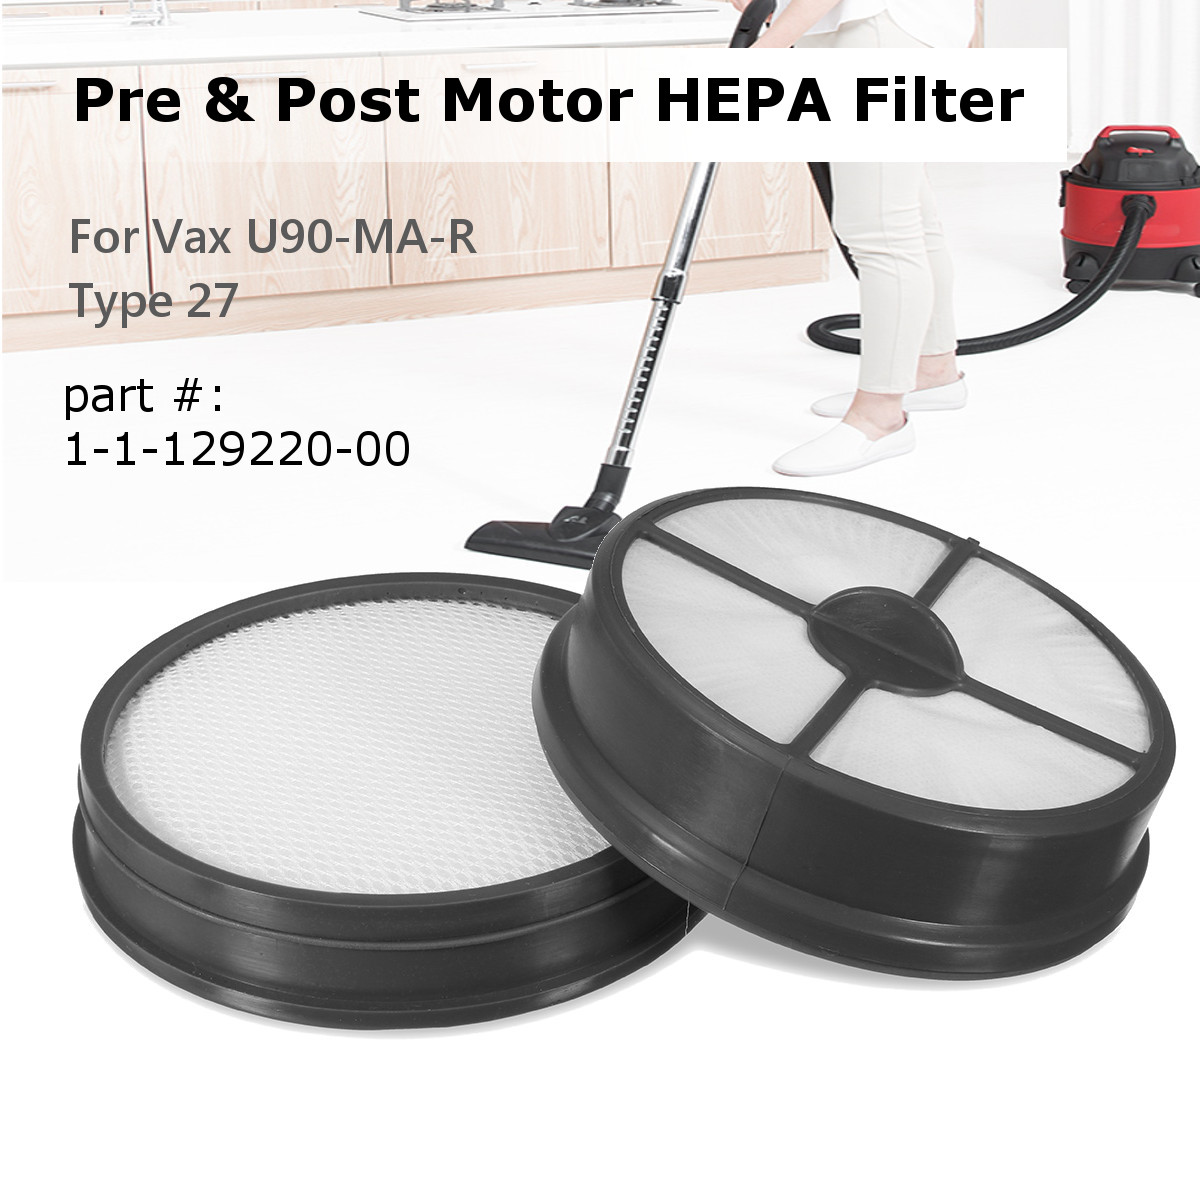 Type-27-Pre-amp-Post-Motor-HEPA-Filter-Replacement-for-Vax-Mach-Air-Vacuum-Cleaner-Hoover-1227318